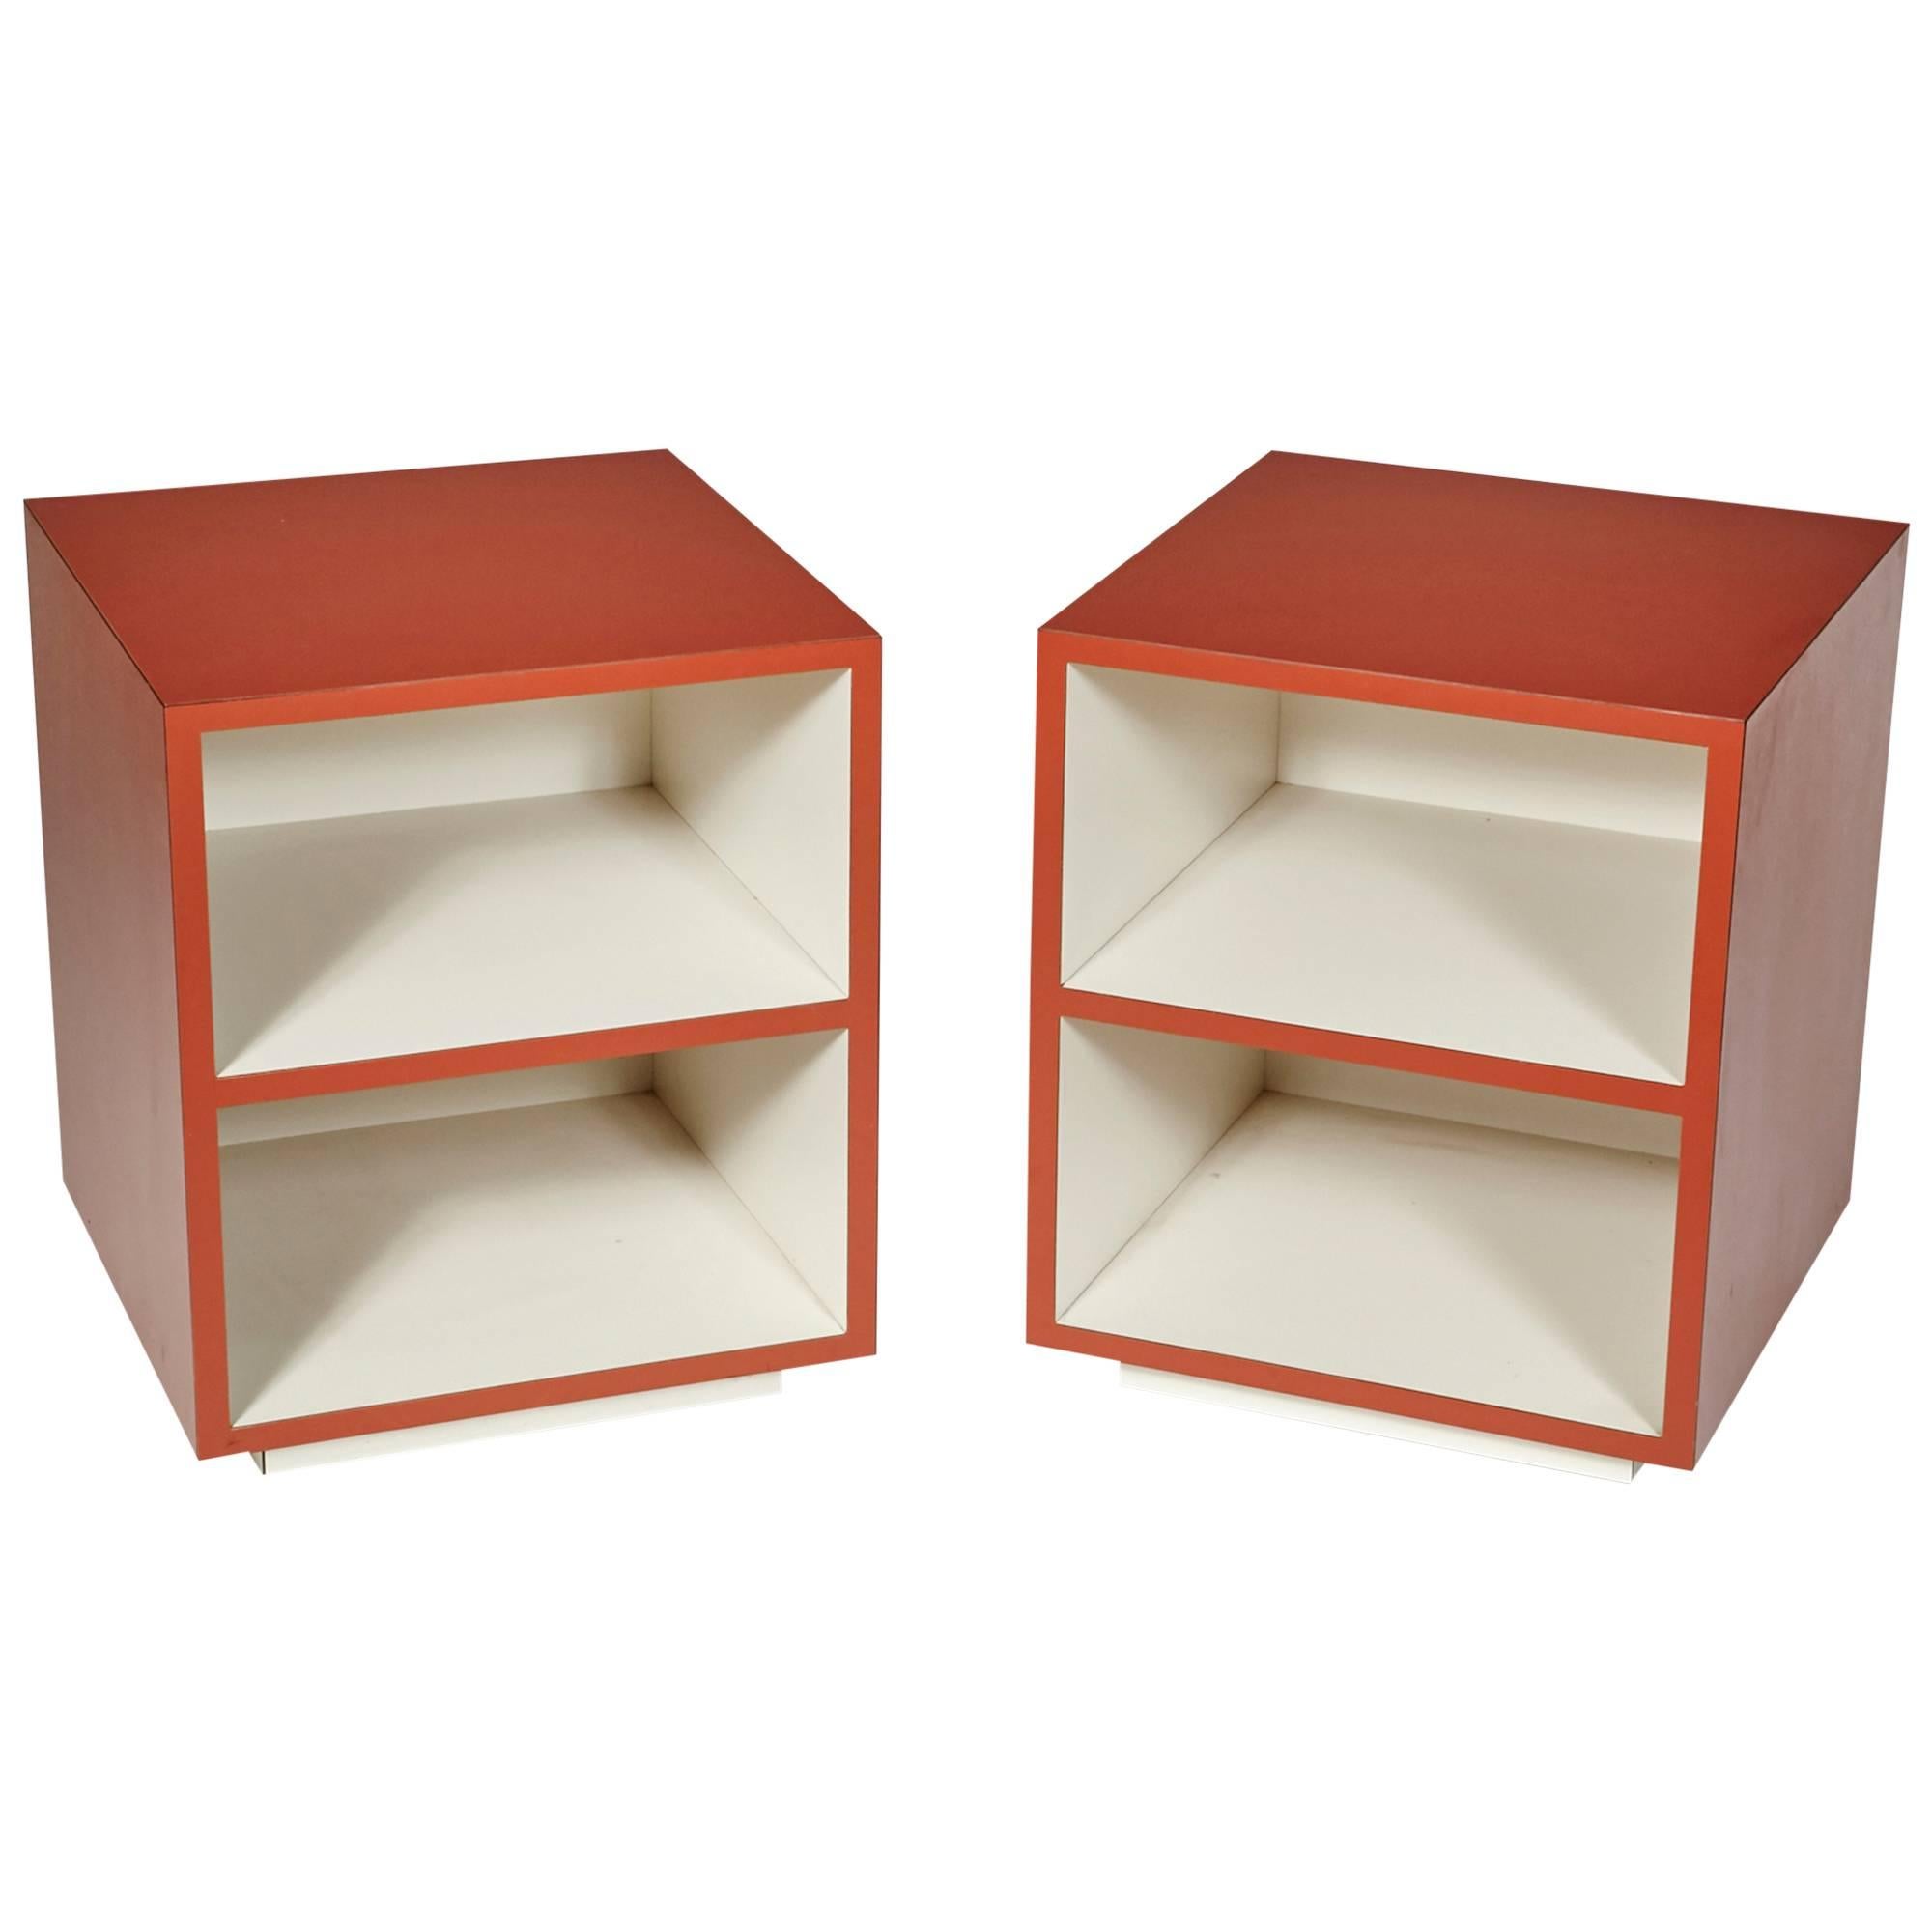 1970s Orange Cube Side Tables, Pair For Sale